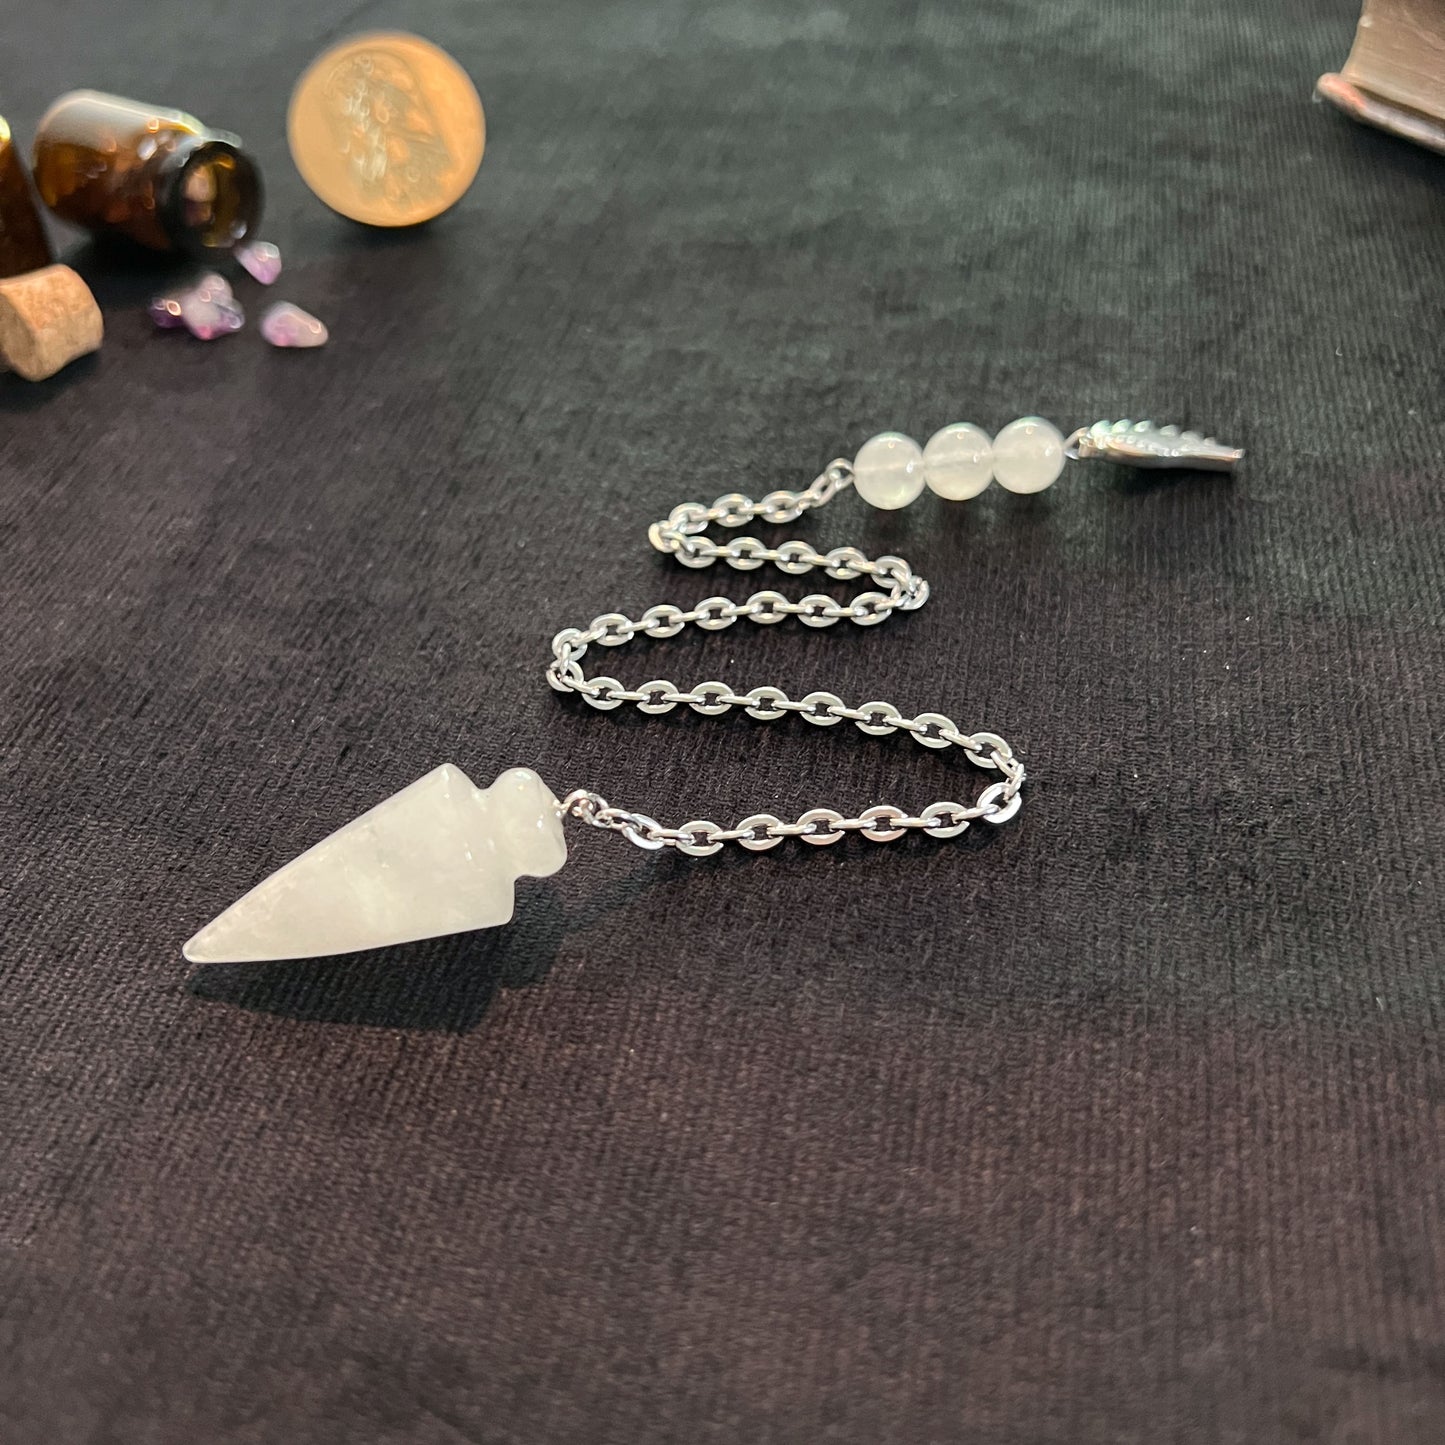 divination gemstone quartz pendulum wing and beads witchcraft altar tool for occult witch